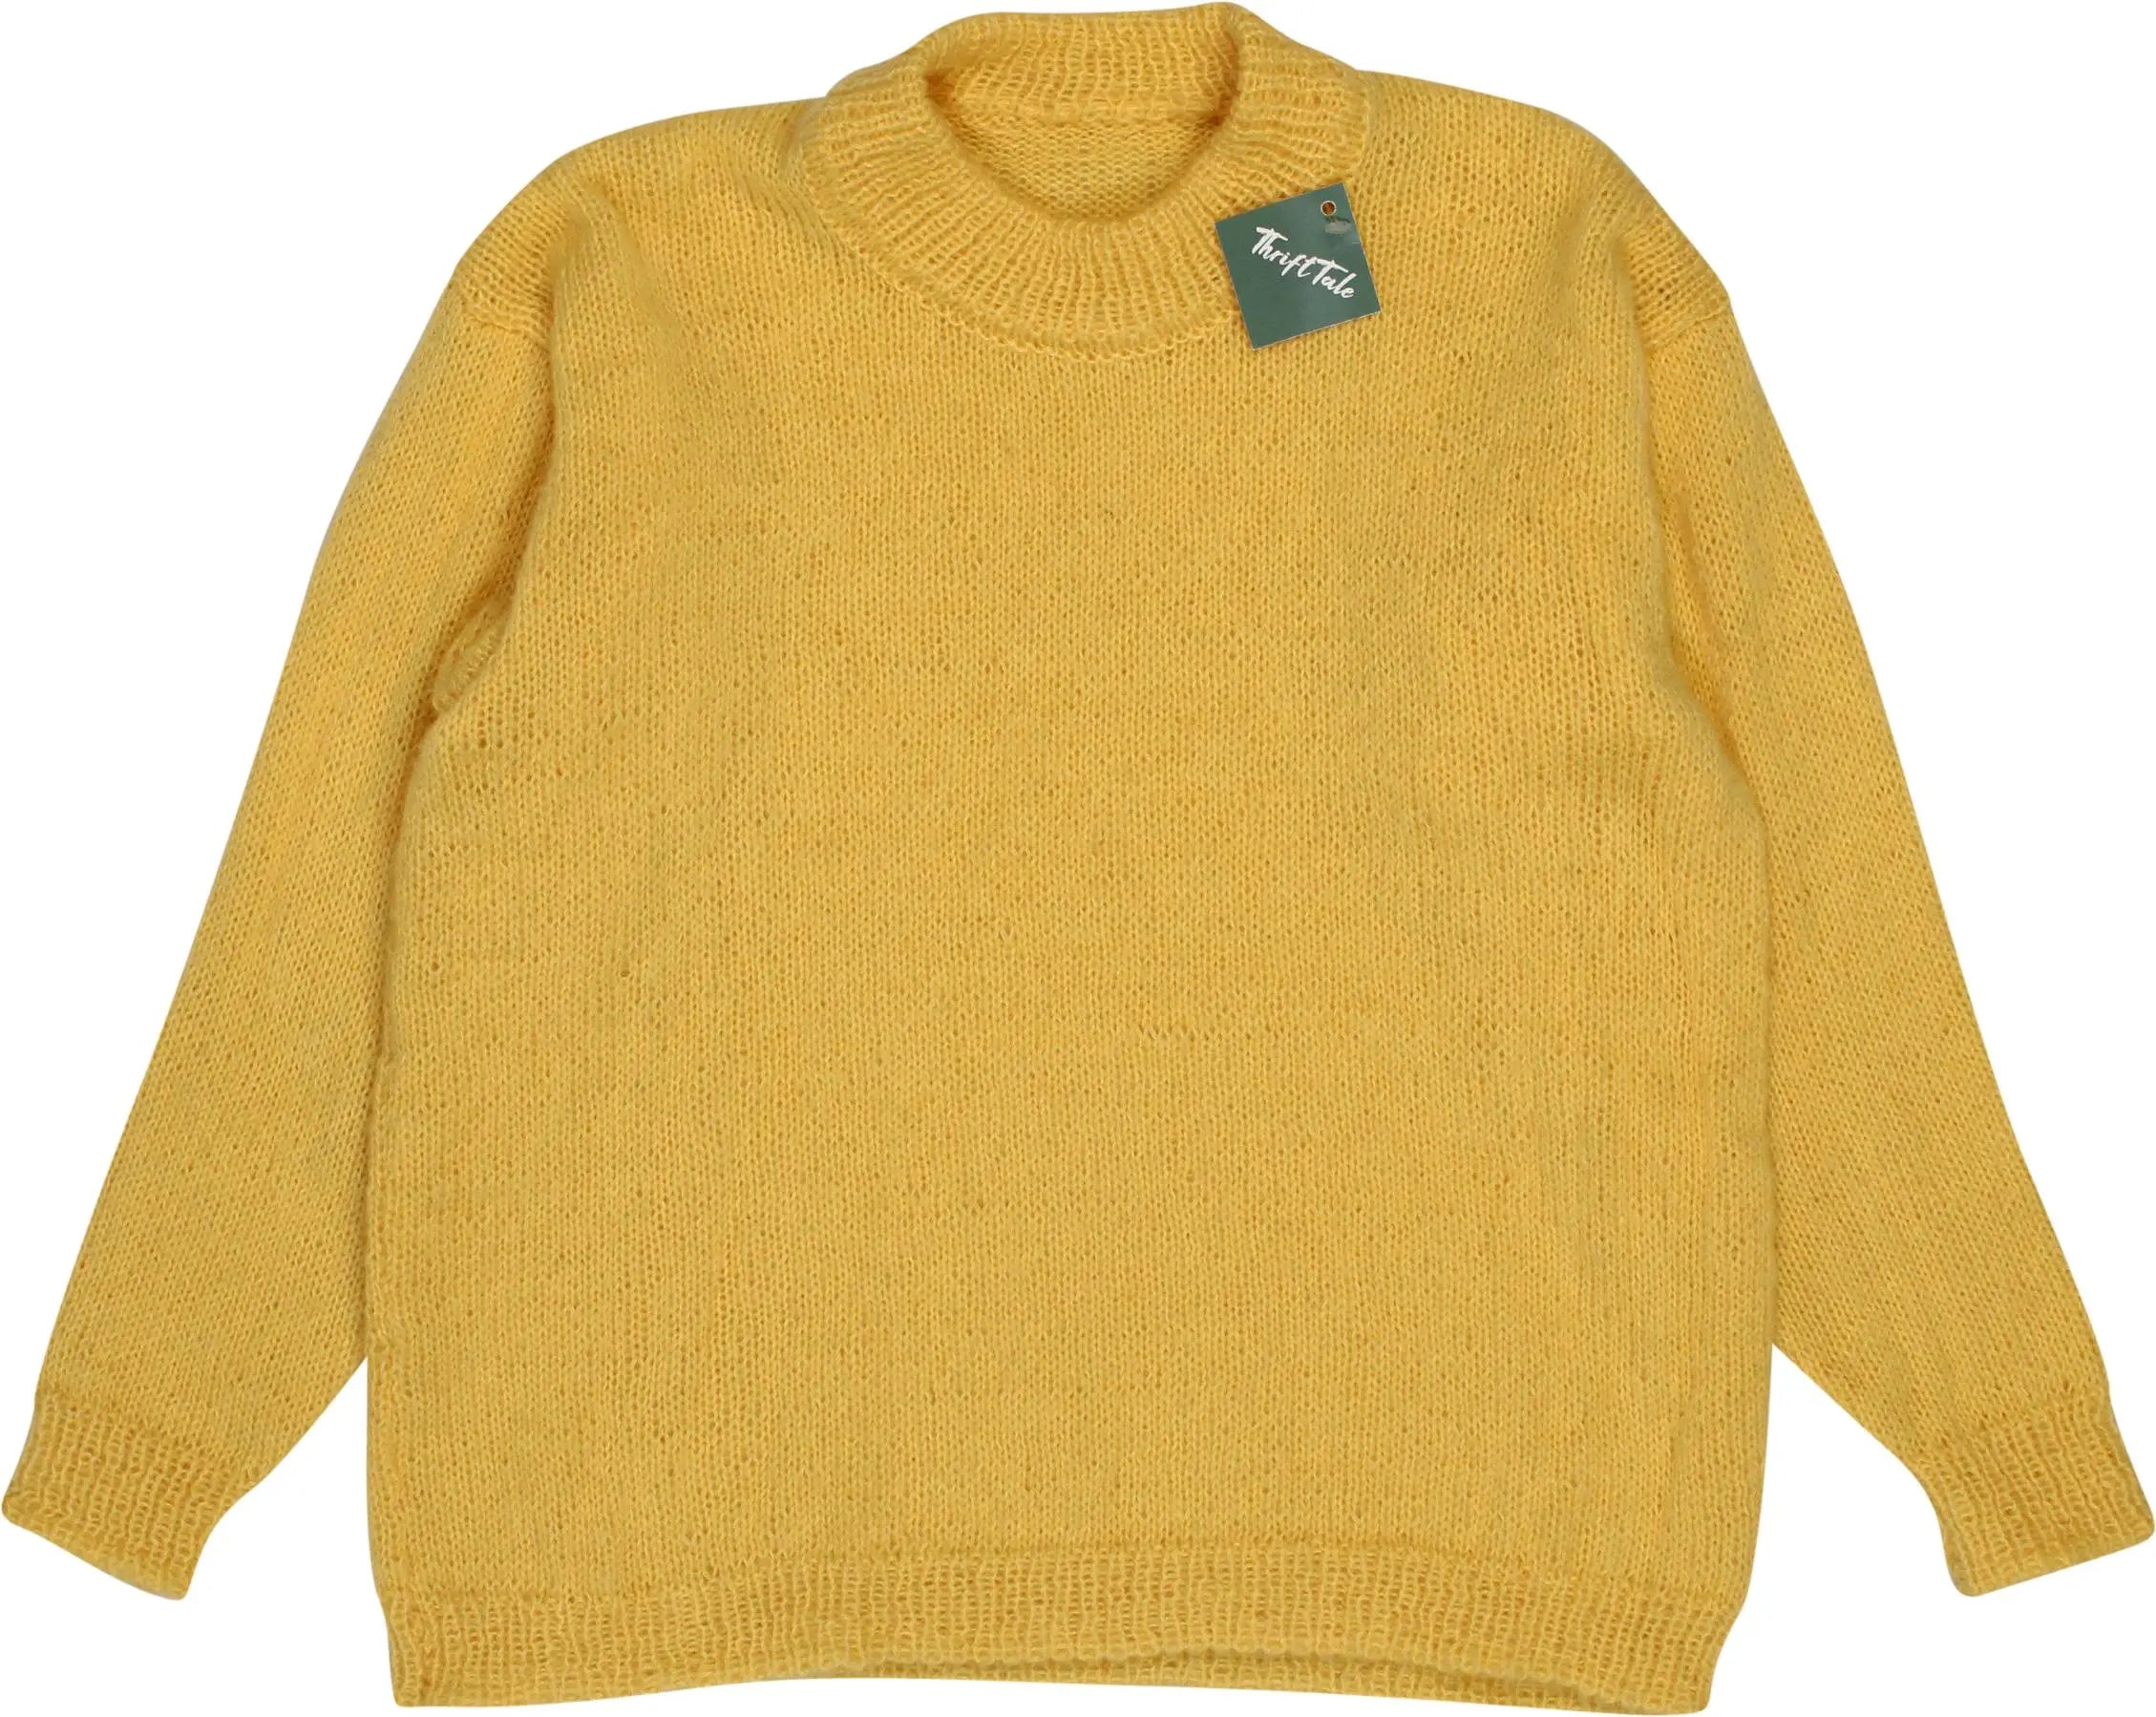 Handmade - Handmade Yellow Knitted Jumper- ThriftTale.com - Vintage and second handclothing